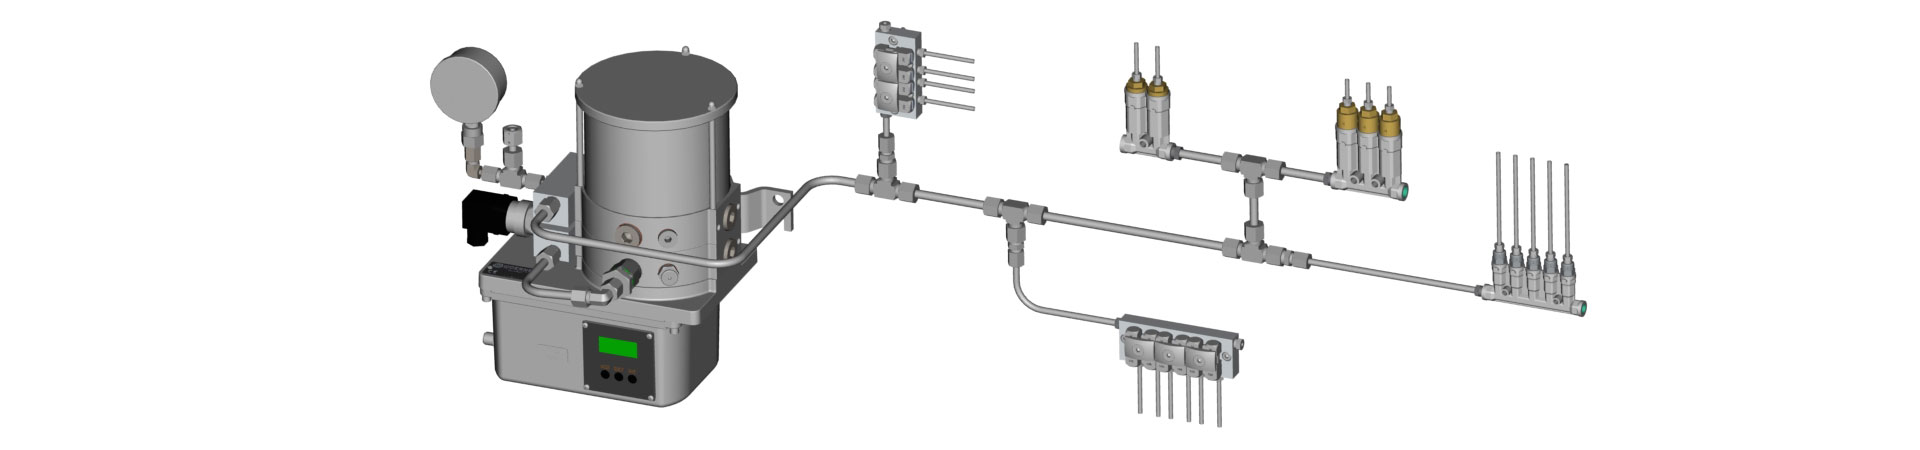 GMG-LEZ Single-Line System for oil and grease